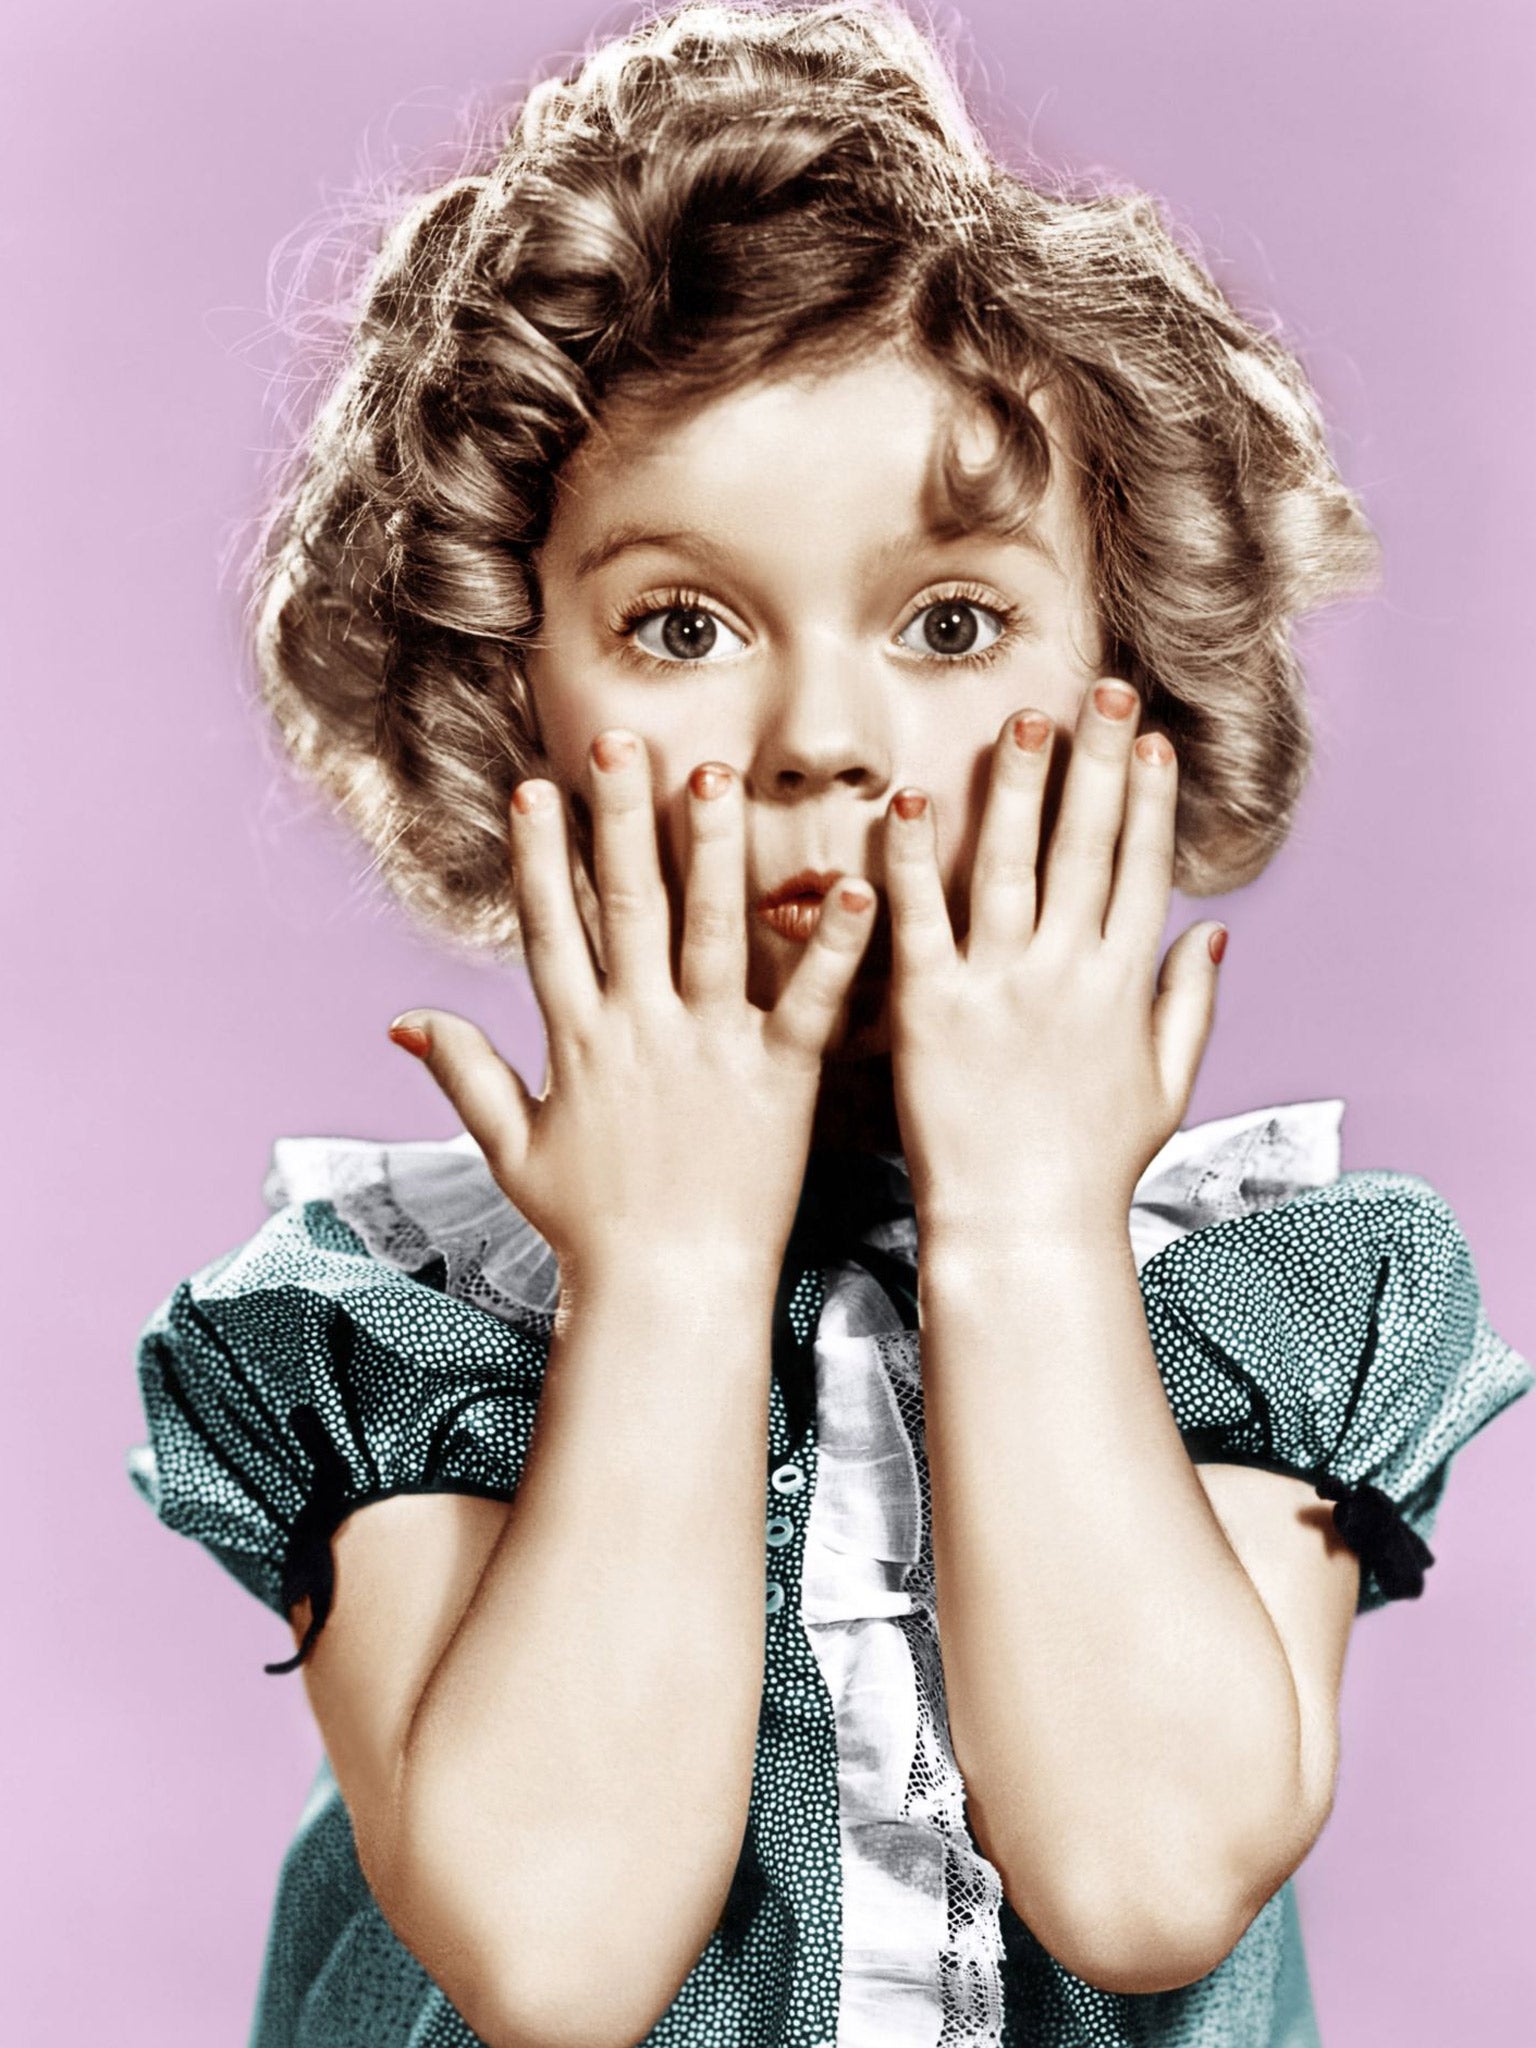 Shirley Temple, pictured in 1934. Although her films are no longer popular, she has remained the quintessential Hollywood child star